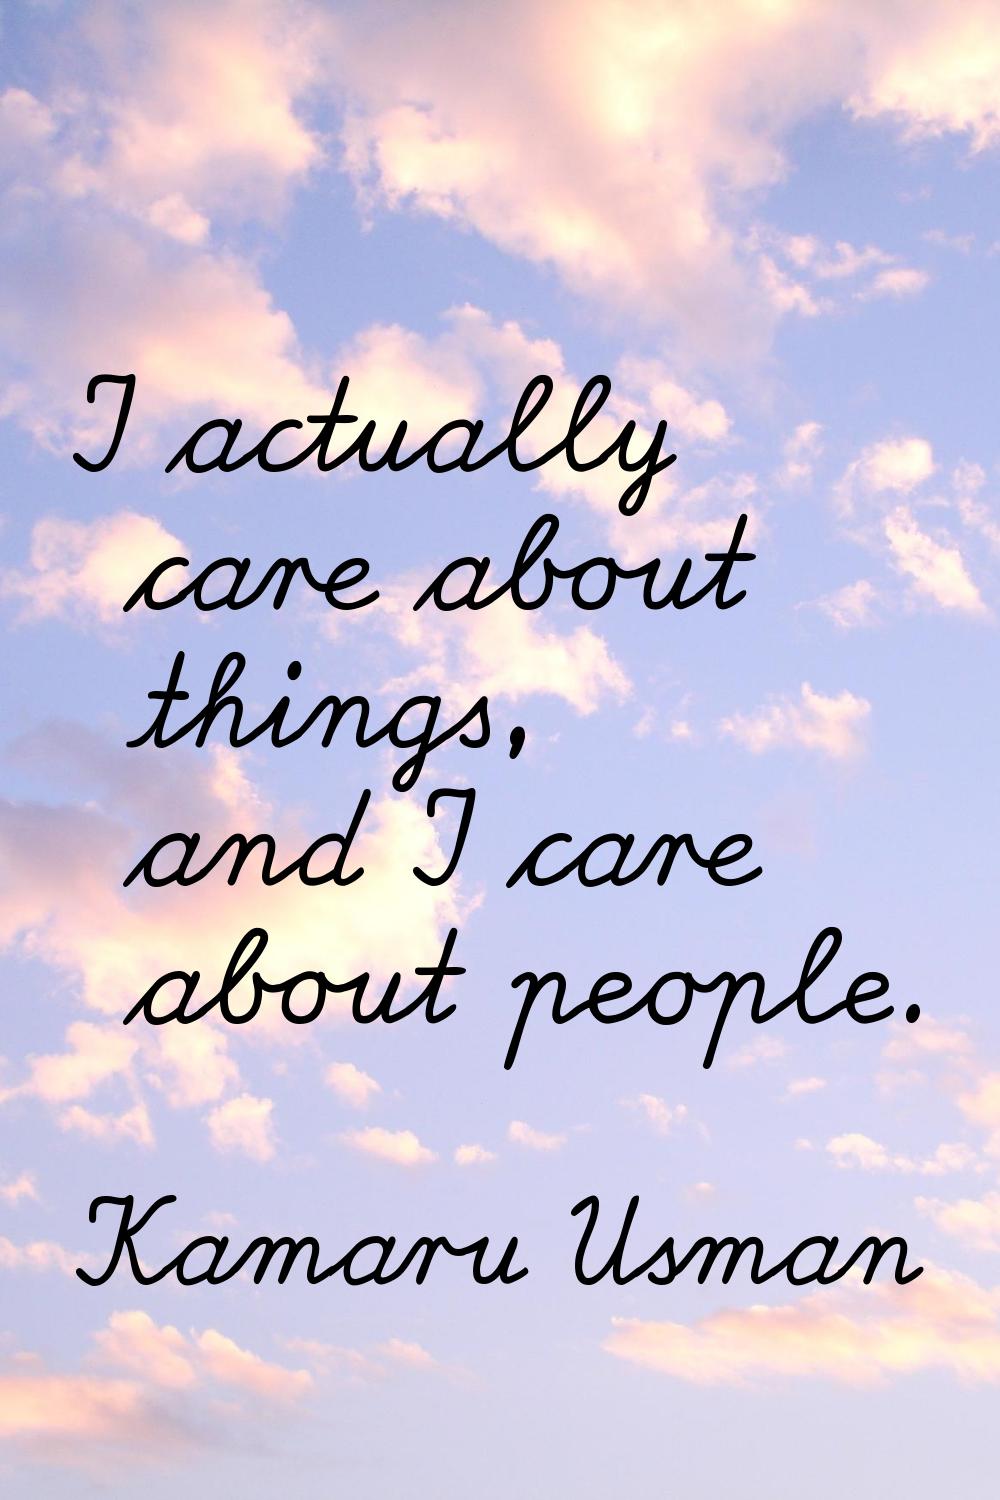 I actually care about things, and I care about people.